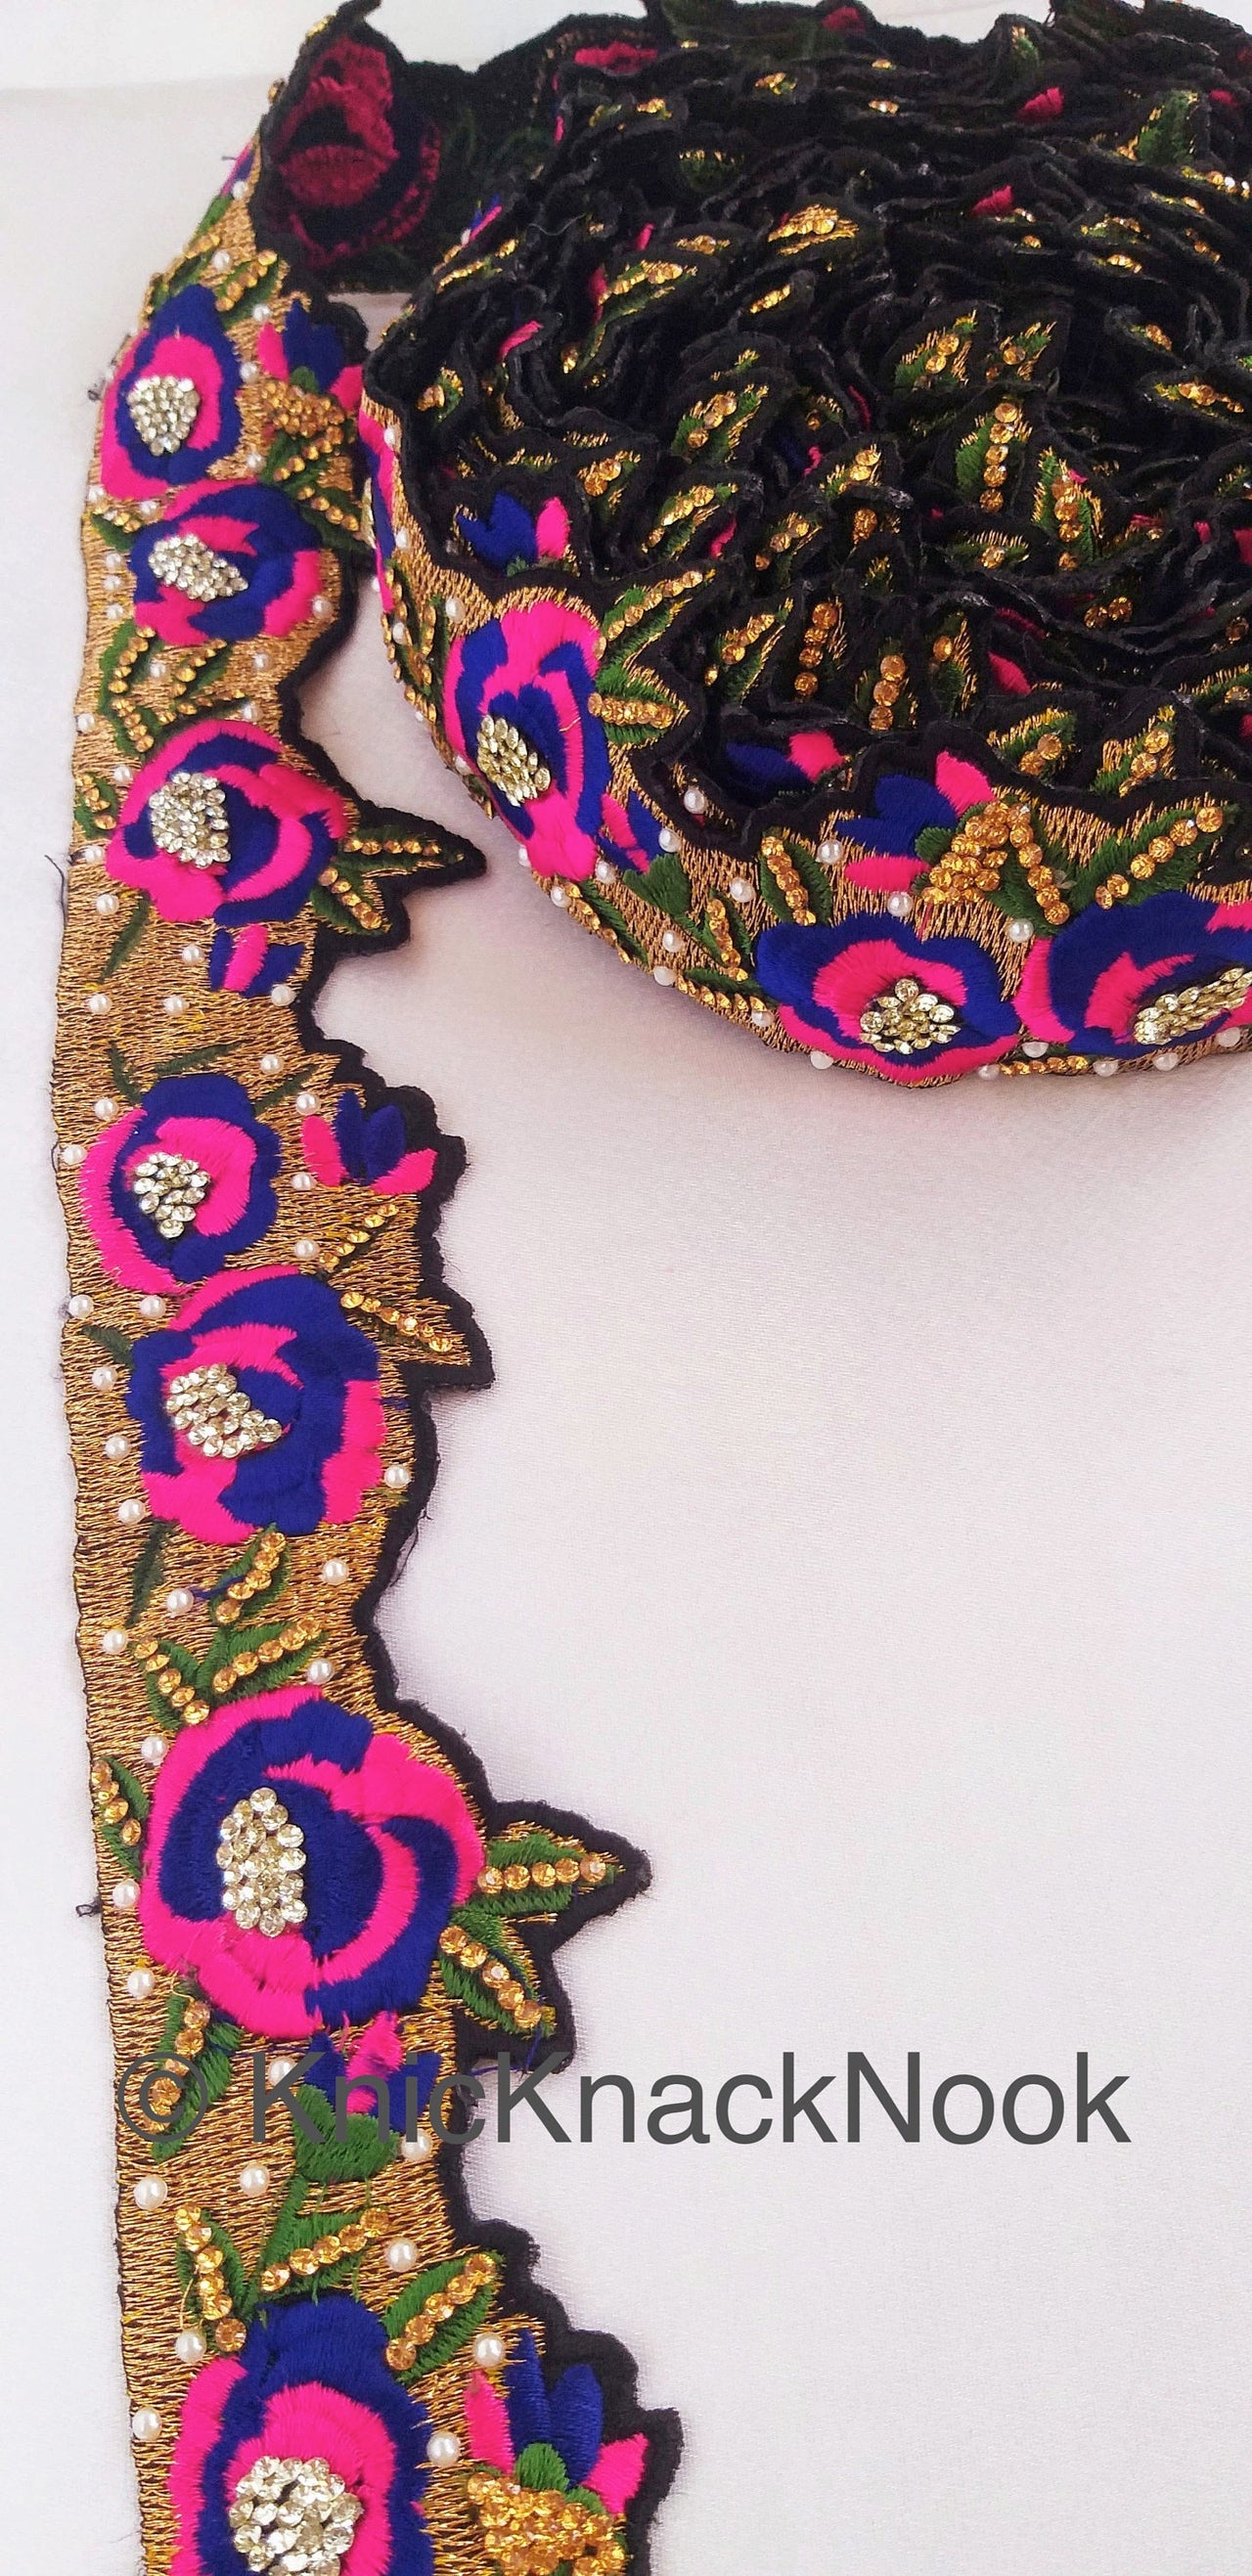 Floral Embroidered Fabric Trim In Gold, Black, Pink